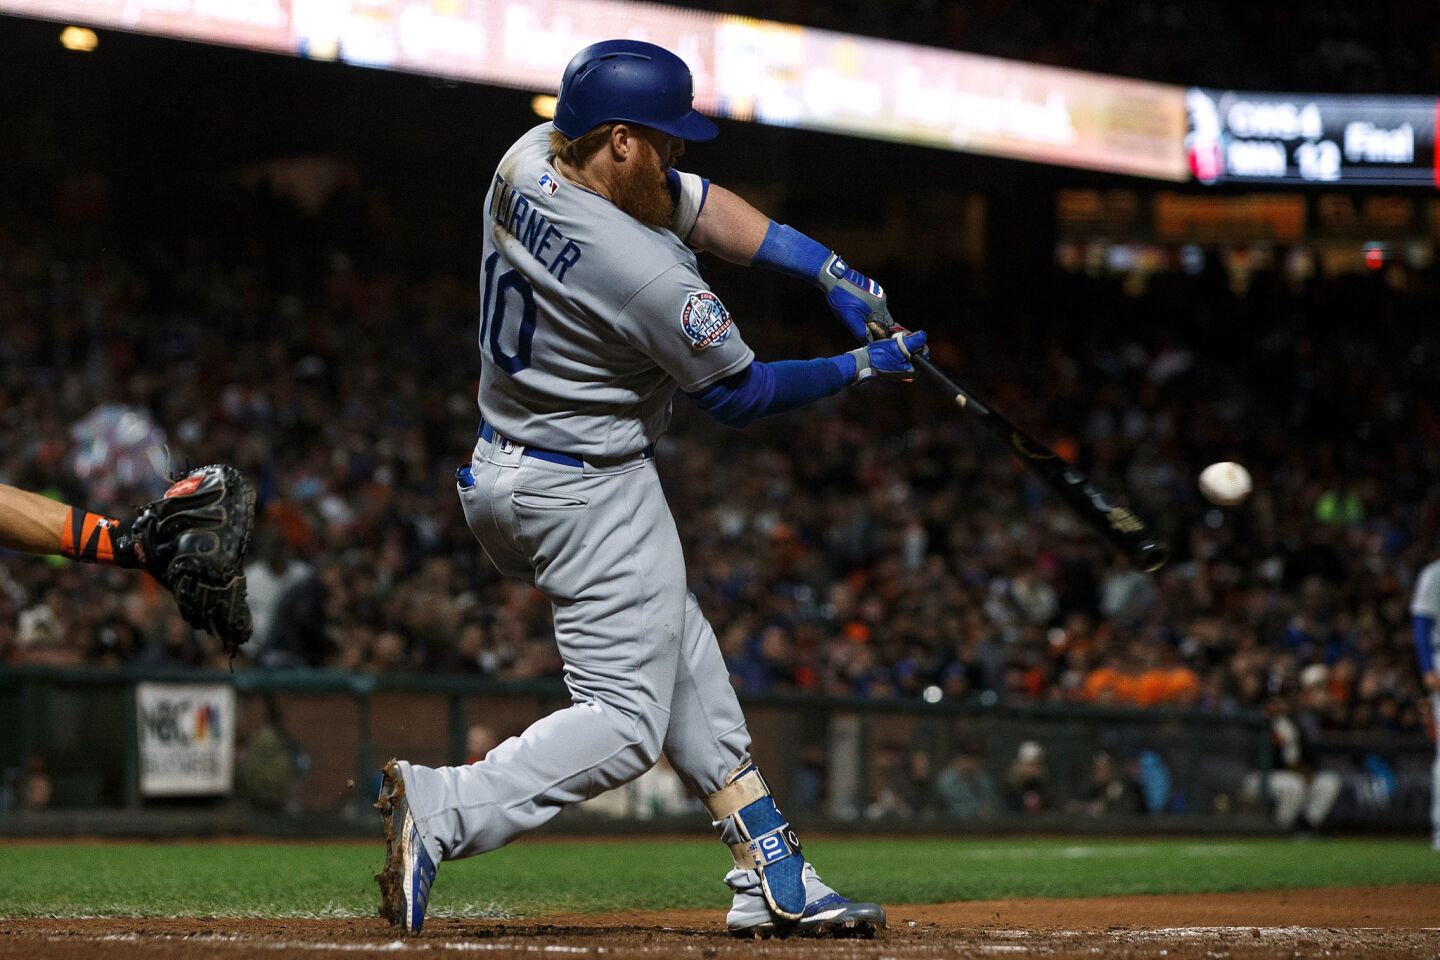 SAN FRANCISCO, CA - SEPTEMBER 28: Justin Turner #10 of the Los Angeles Dodgers hits a two run home run against the San Francisco Giants during the fifth inning at AT&T Park on September 28, 2018 in San Francisco, California. The Los Angeles Dodgers defeated the San Francisco Giants 3-1. (Photo by Jason O. Watson/Getty Images) ** OUTS - ELSENT, FPG, CM - OUTS * NM, PH, VA if sourced by CT, LA or MoD **